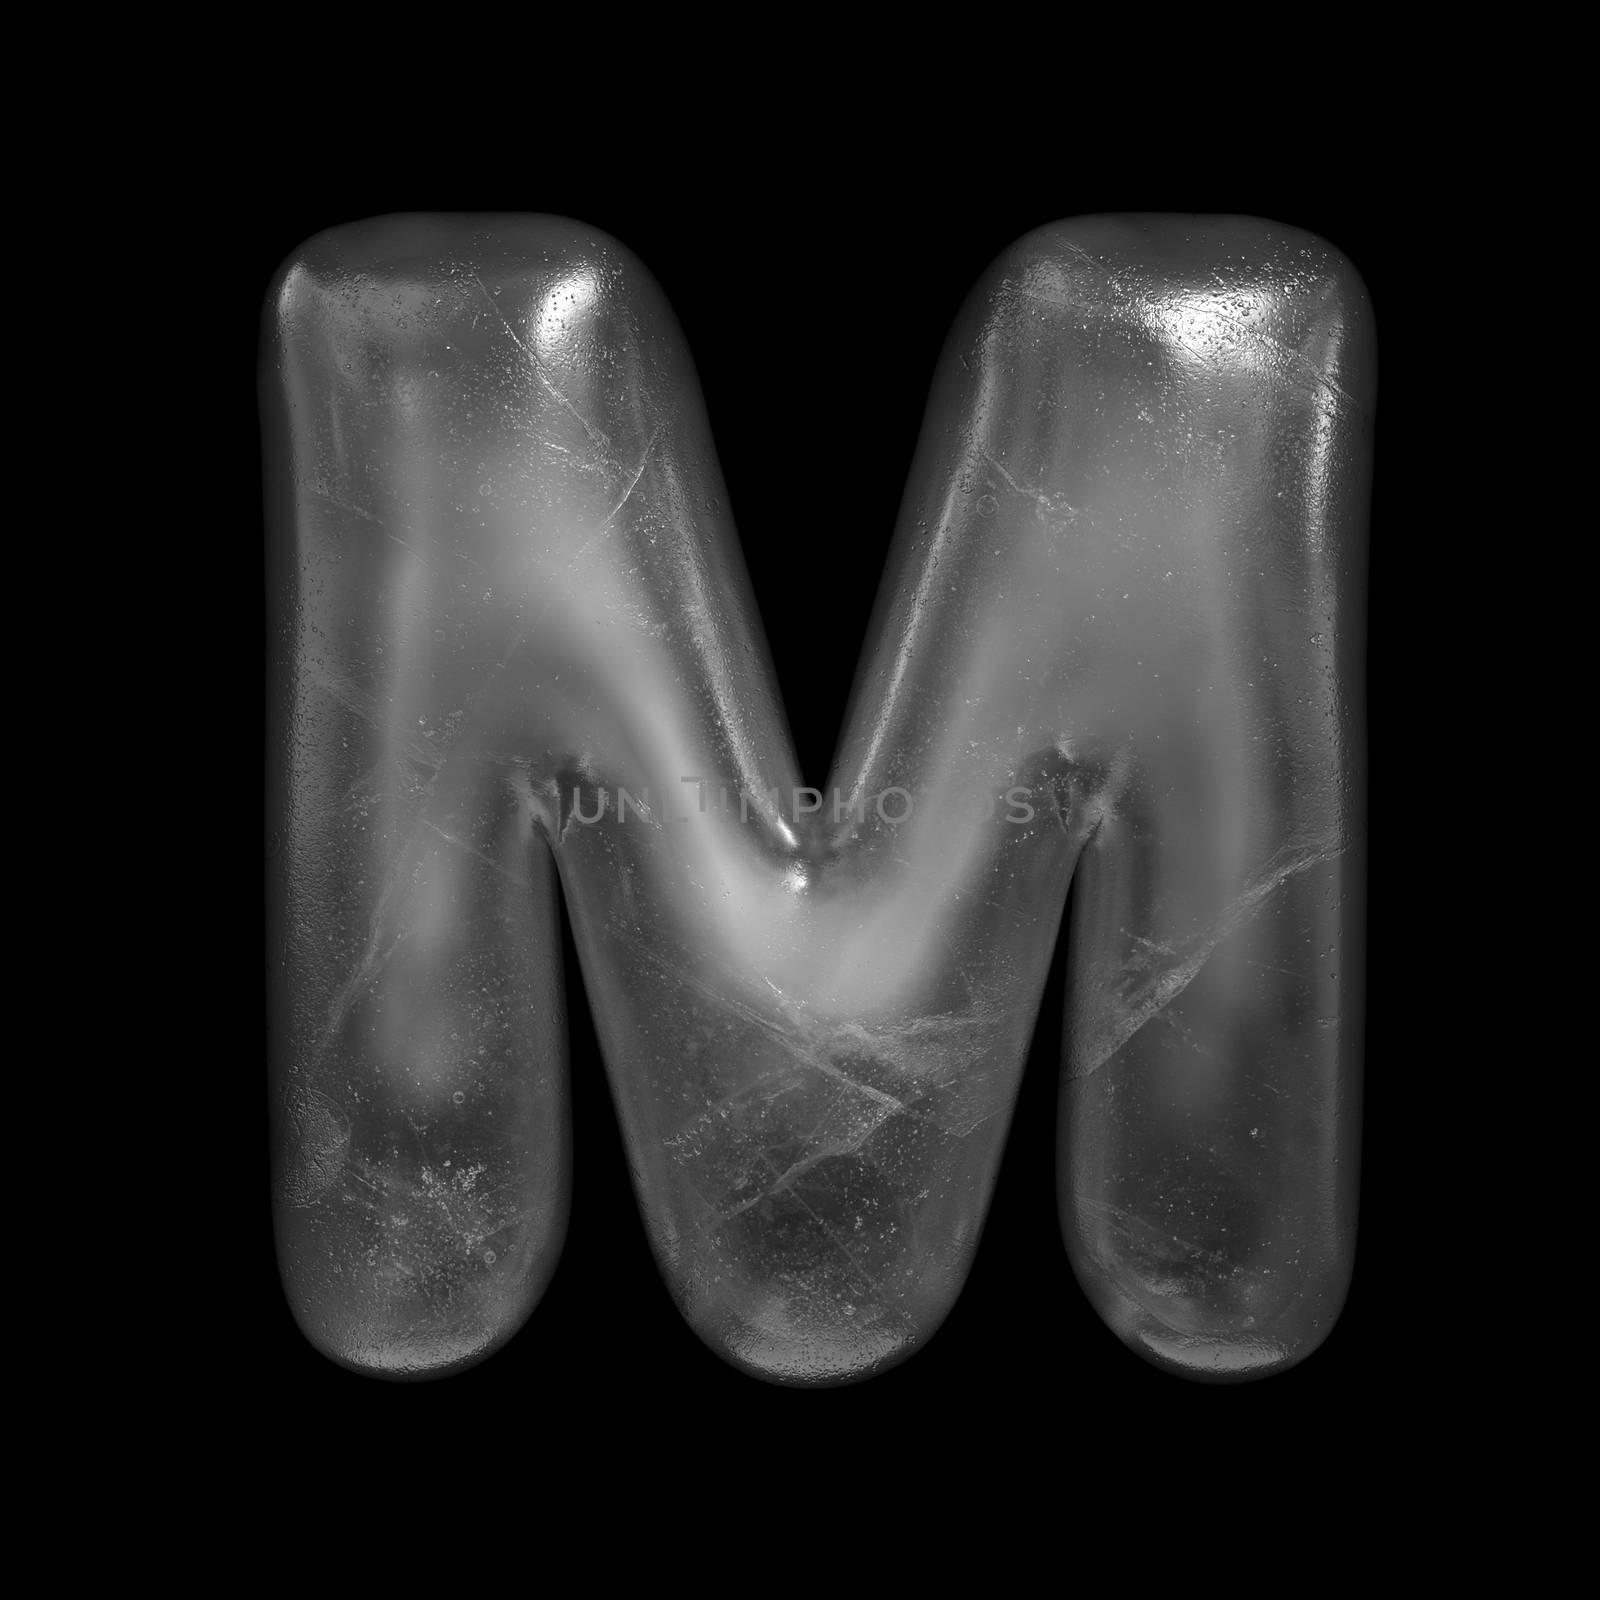 Ice letter M - Upper-case 3d Winter font isolated on black background. This alphabet is perfect for creative illustrations related but not limited to Nature, Winter, Christmas...